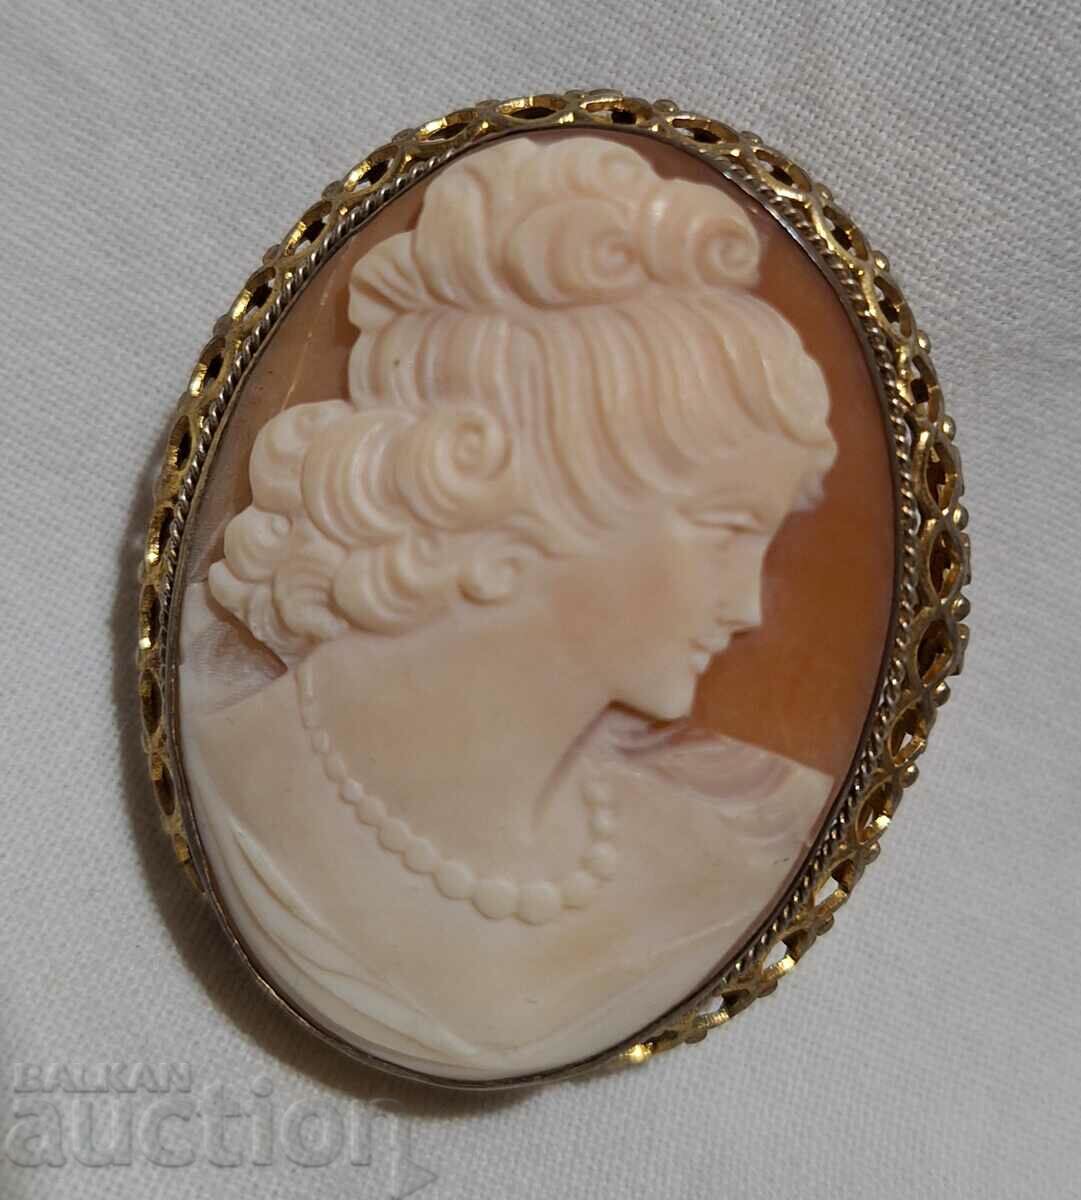 Antique jewelry with cameo brooch pendant jewelry